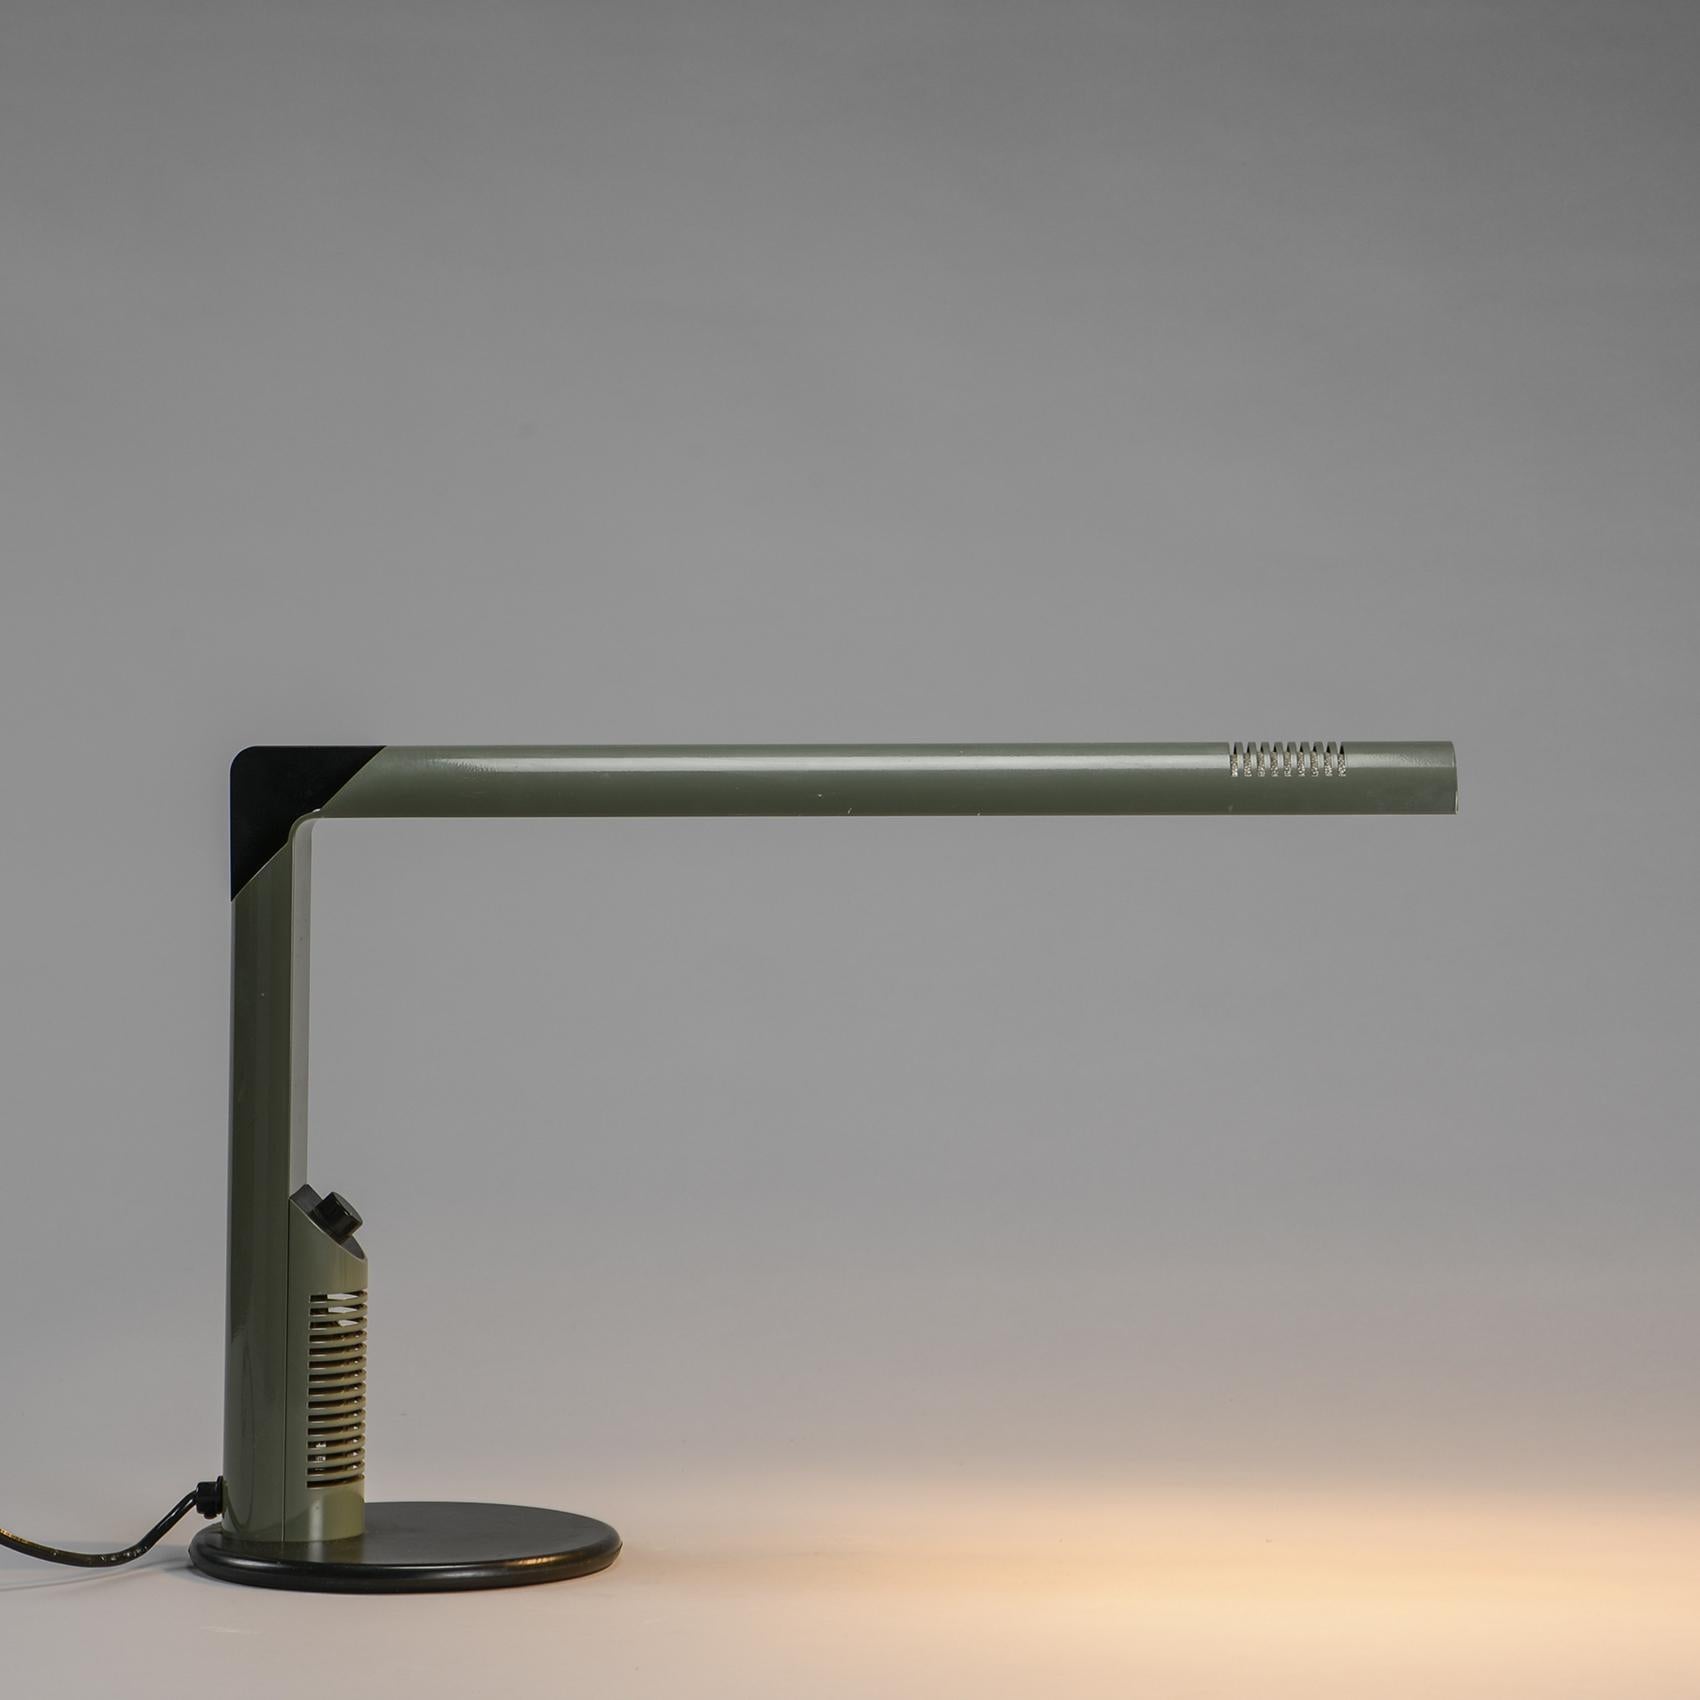 Halogen desk lamp designed by Gianfranco Frattini in the late 1970s;

It consists of a metal base housing a grey lacquered extruded metal body.

Published by Luci, 1979.

Bibliography: Giuliana Gramigna, Repertorio 1950-2000, Allemandi,